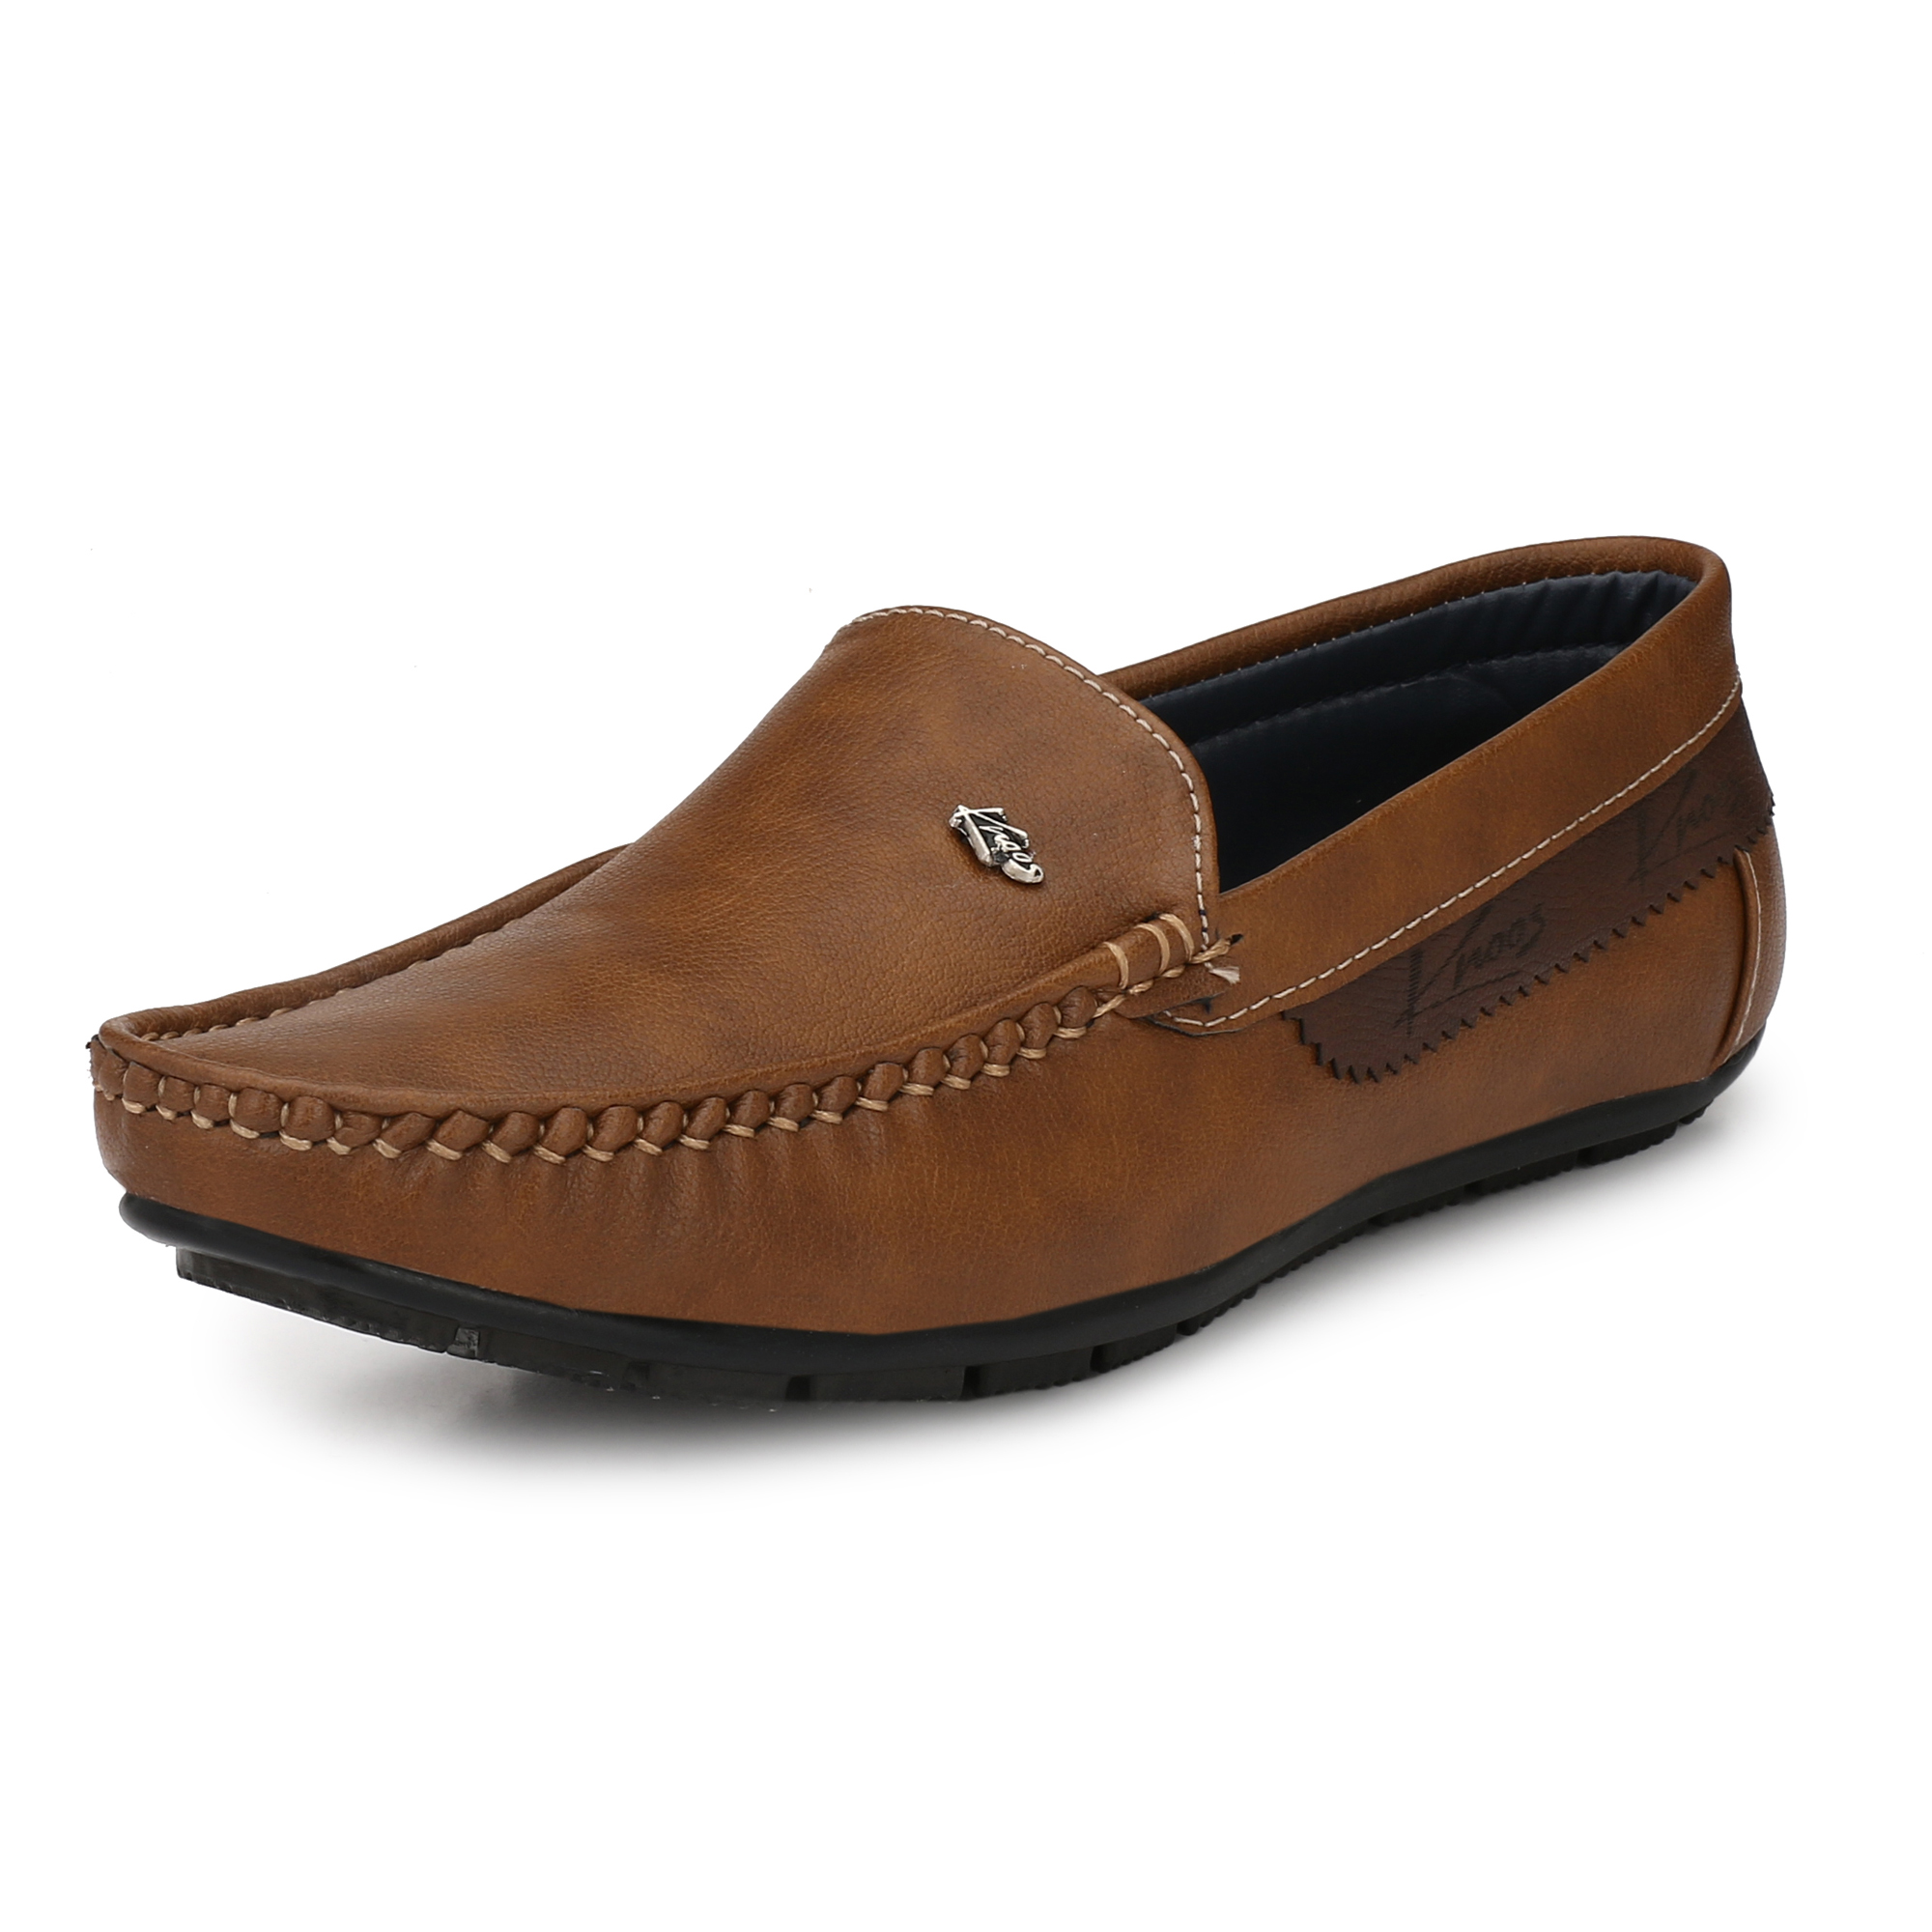 Buy Knoos Men's Tan Synthetic Leather Casual Loafer Online - Get 73% Off